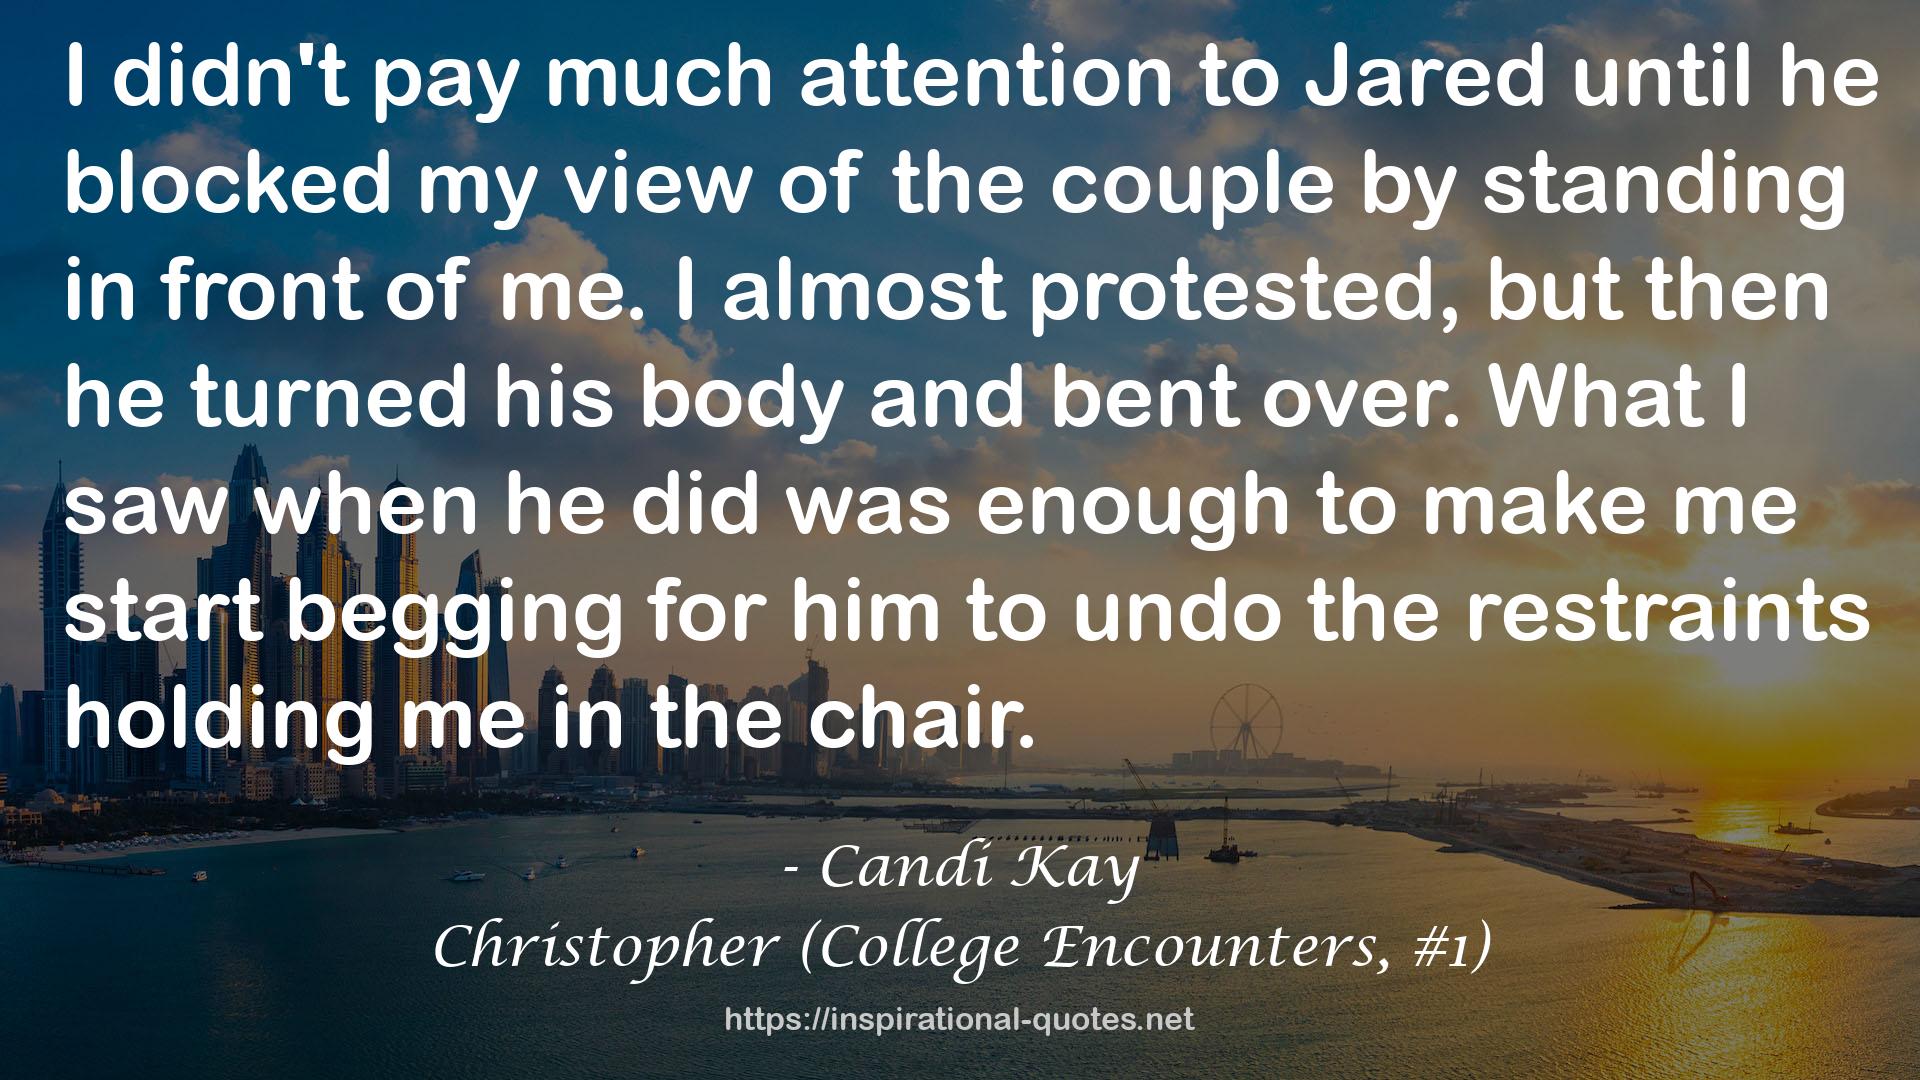 Christopher (College Encounters, #1) QUOTES